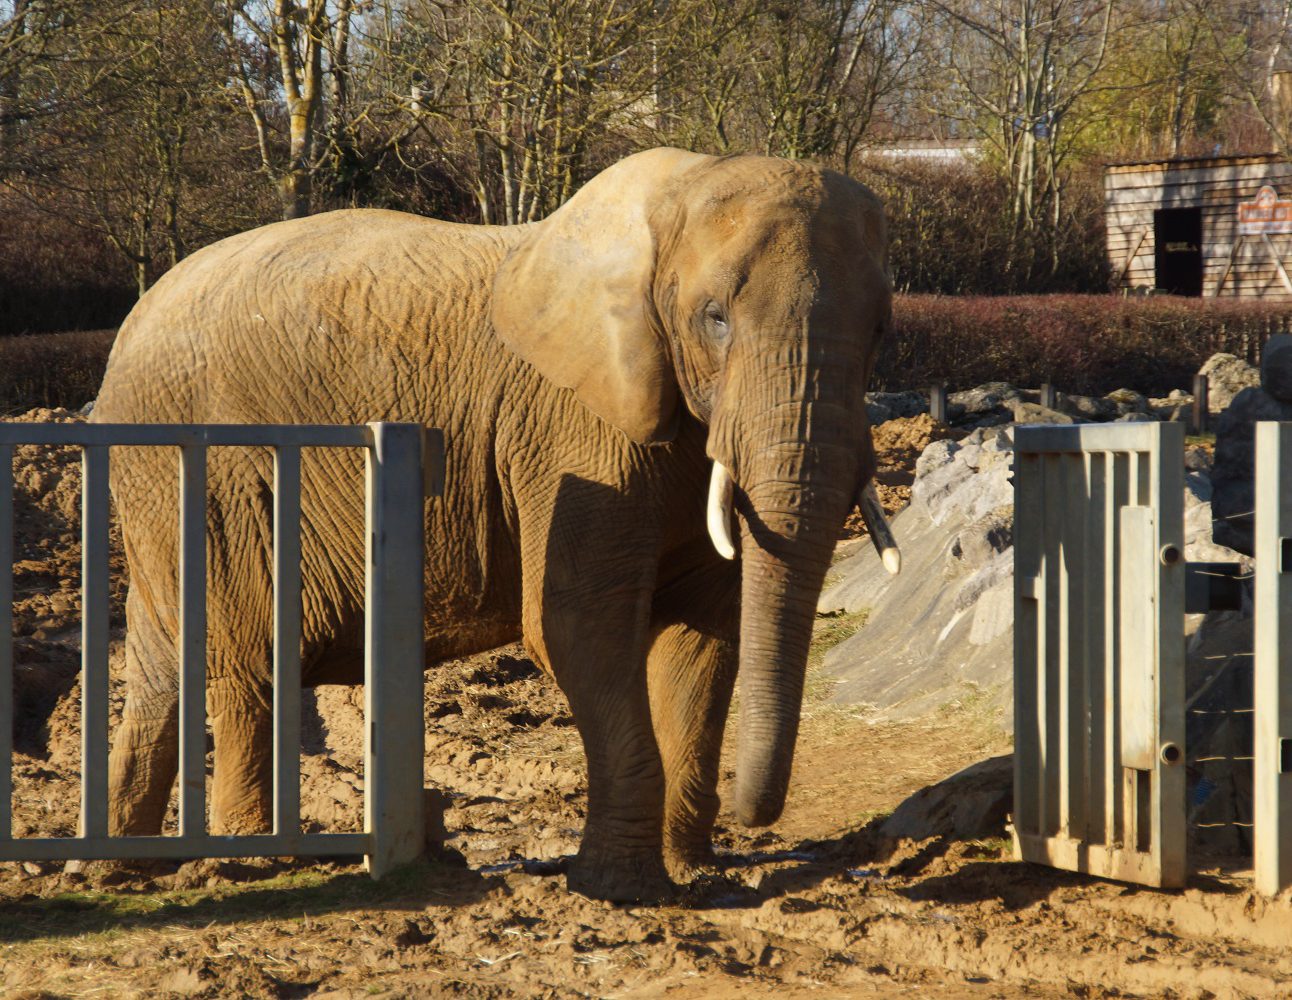 An elephant stands at the entrance to a zoo enclosure